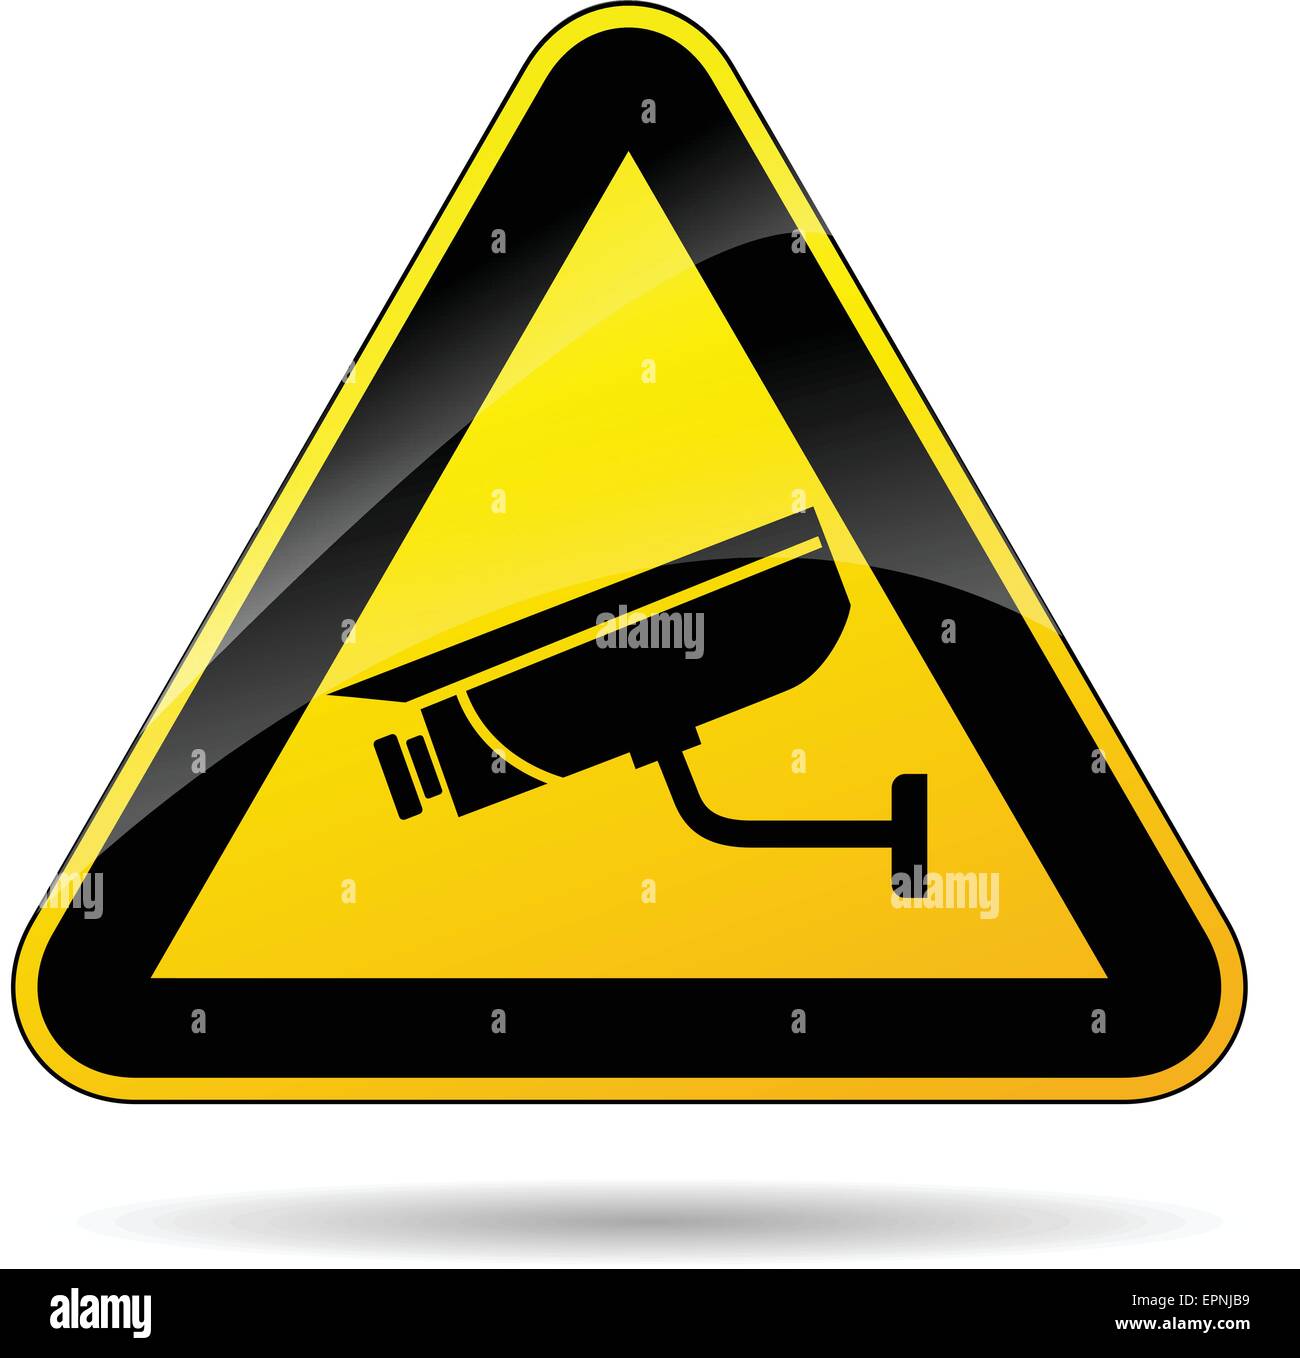 illustration of security camera triangle yellow sign Stock Vector